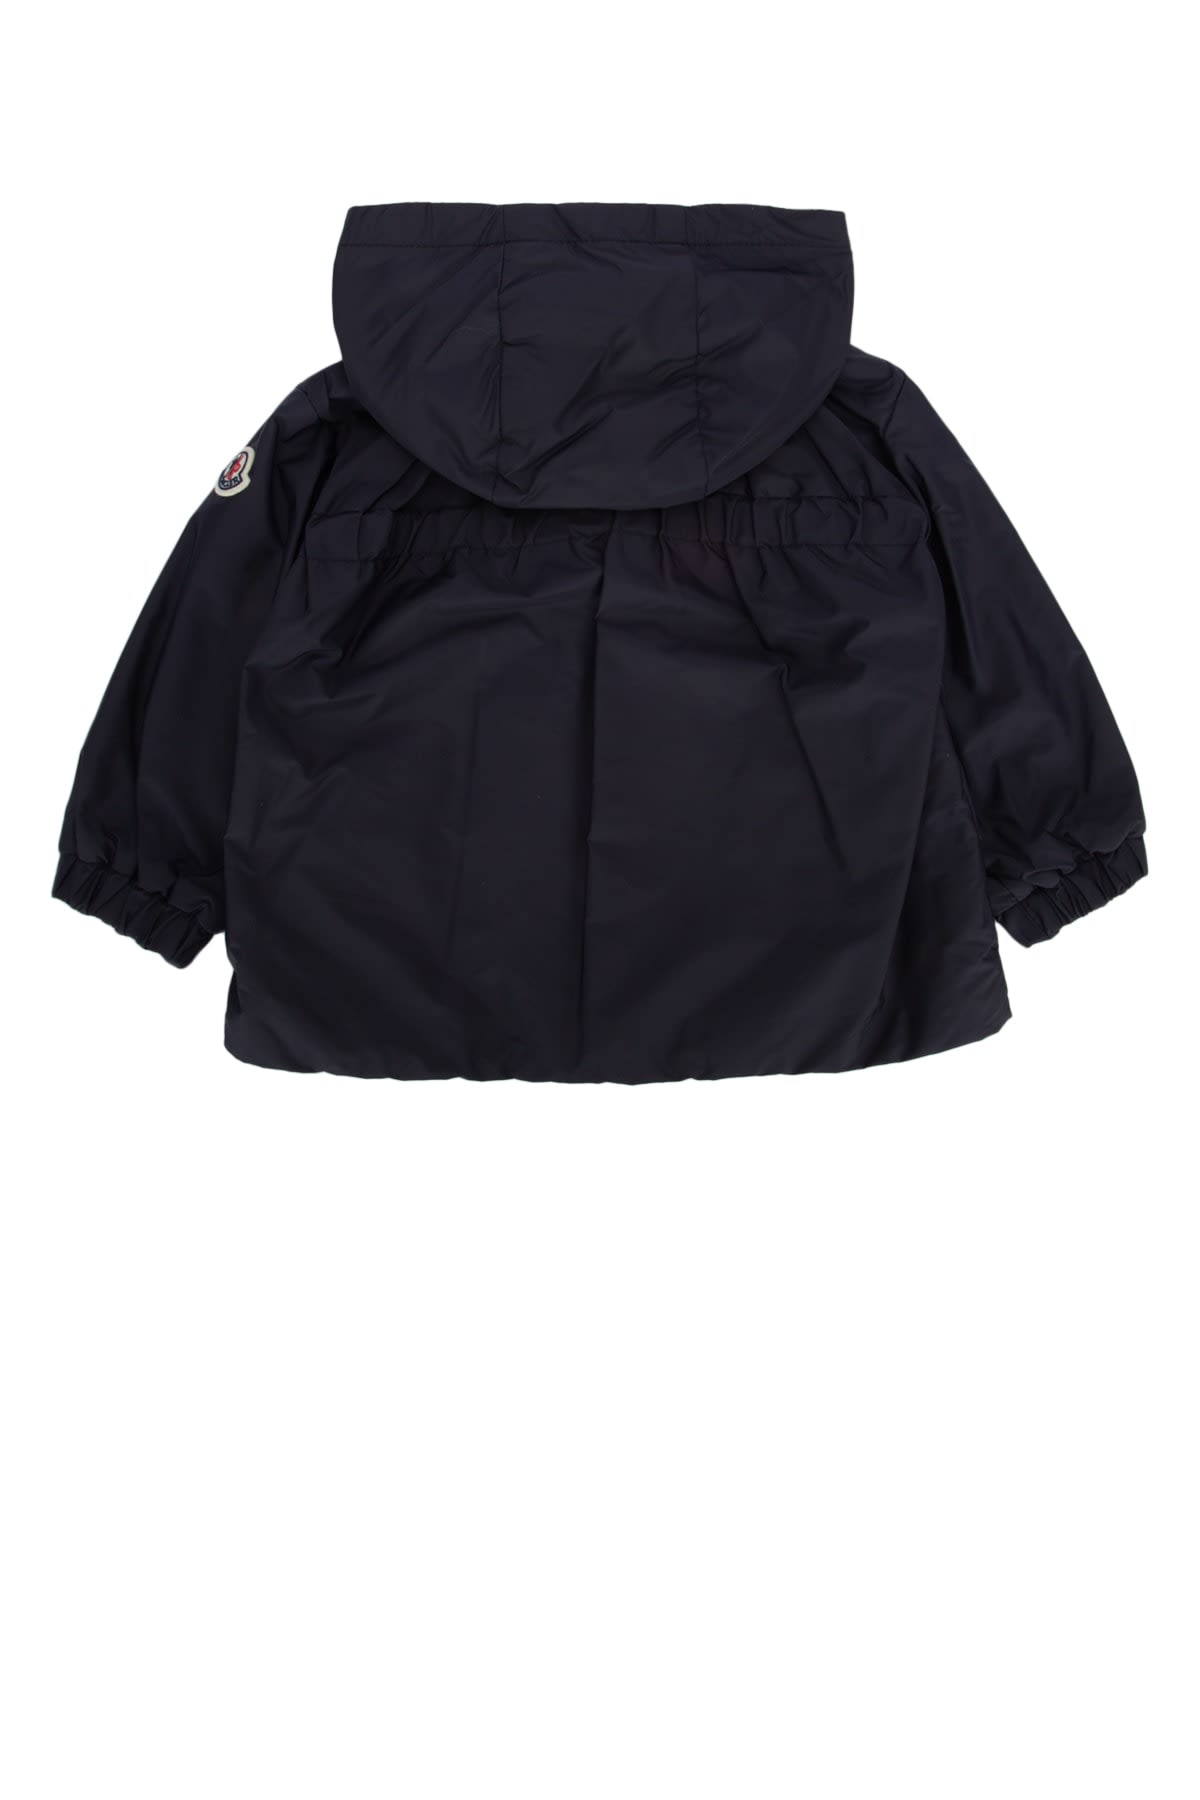 Moncler Kids' Giacca In 742